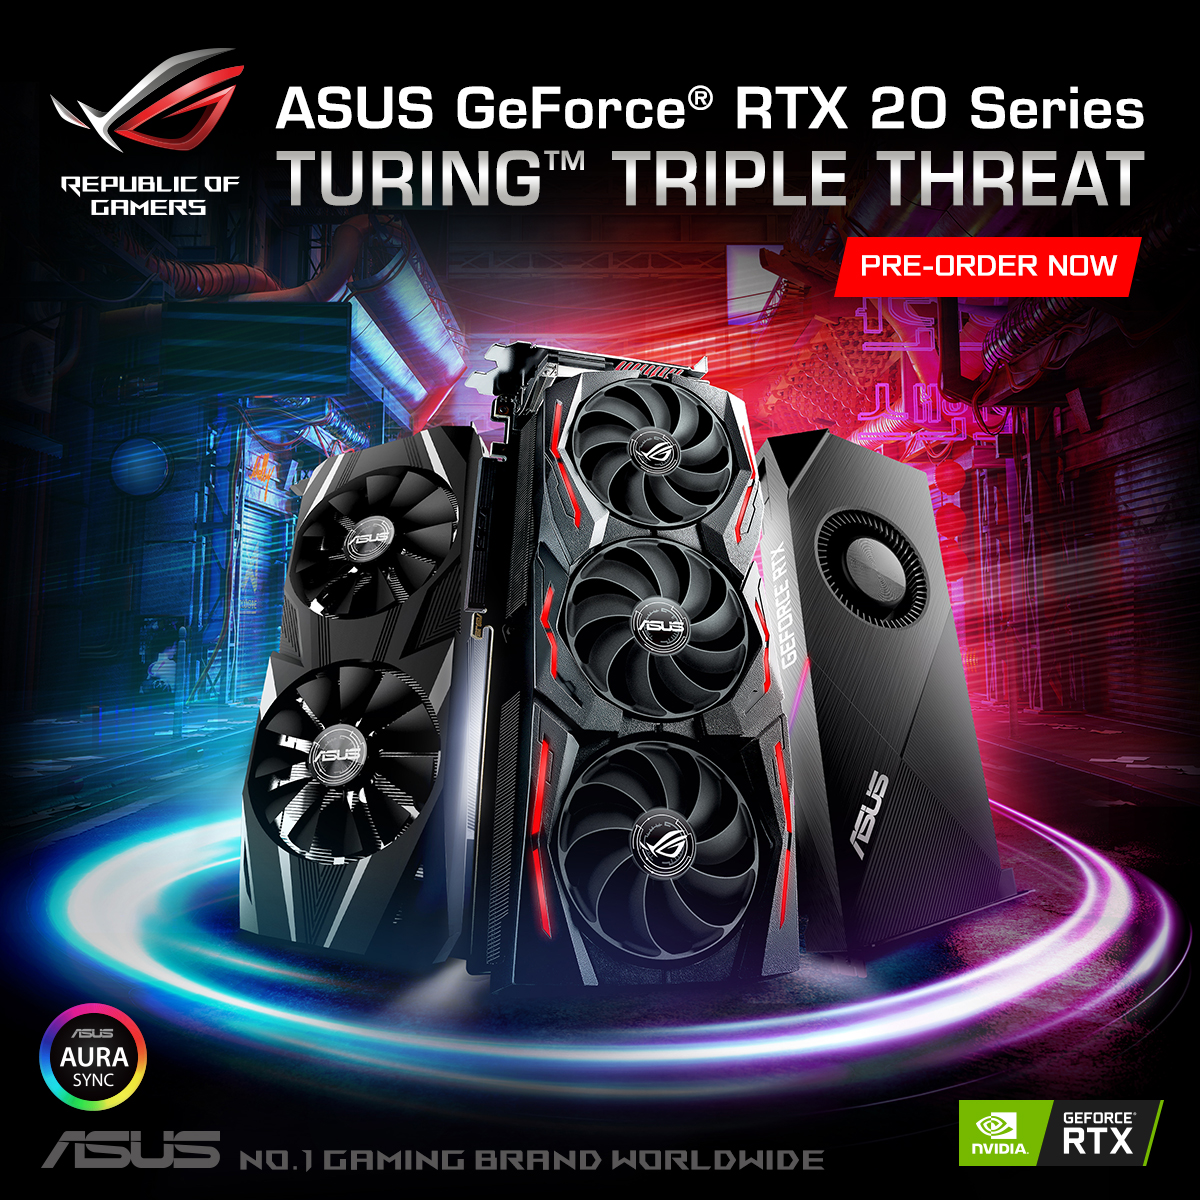 NVIDIA ASUS GeForce RTX 20 Series Graphics Card